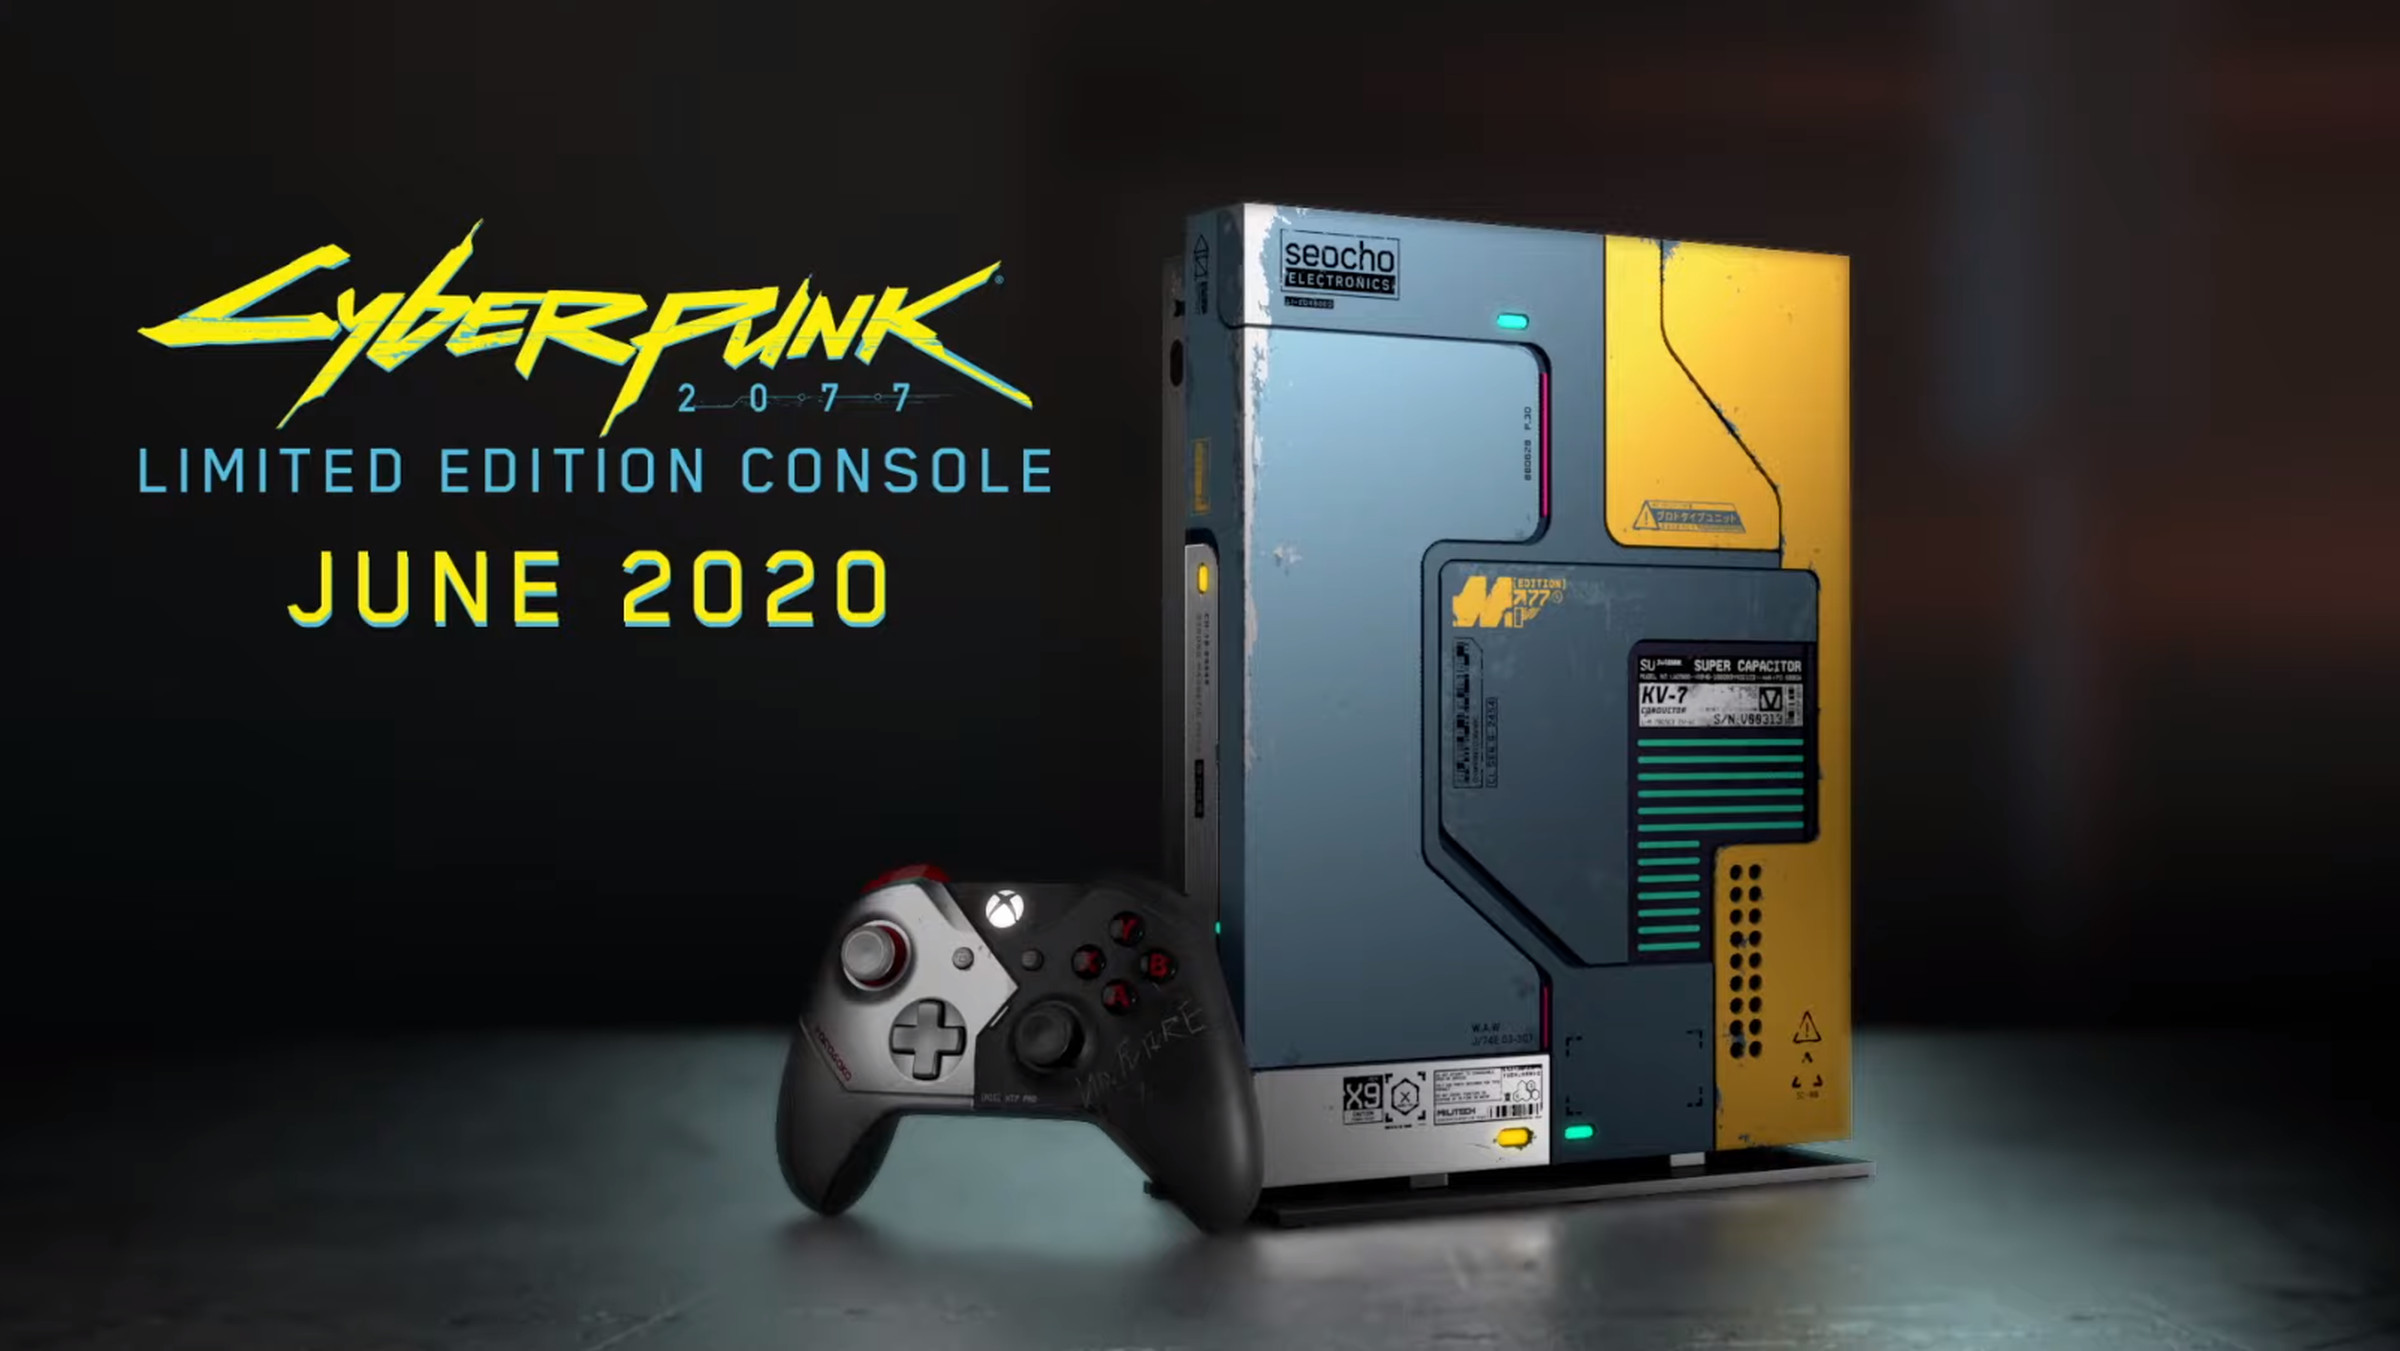 It’s not the worst limited edition console design I’ve seen. I mean, at least it’s not just a big yellow block.